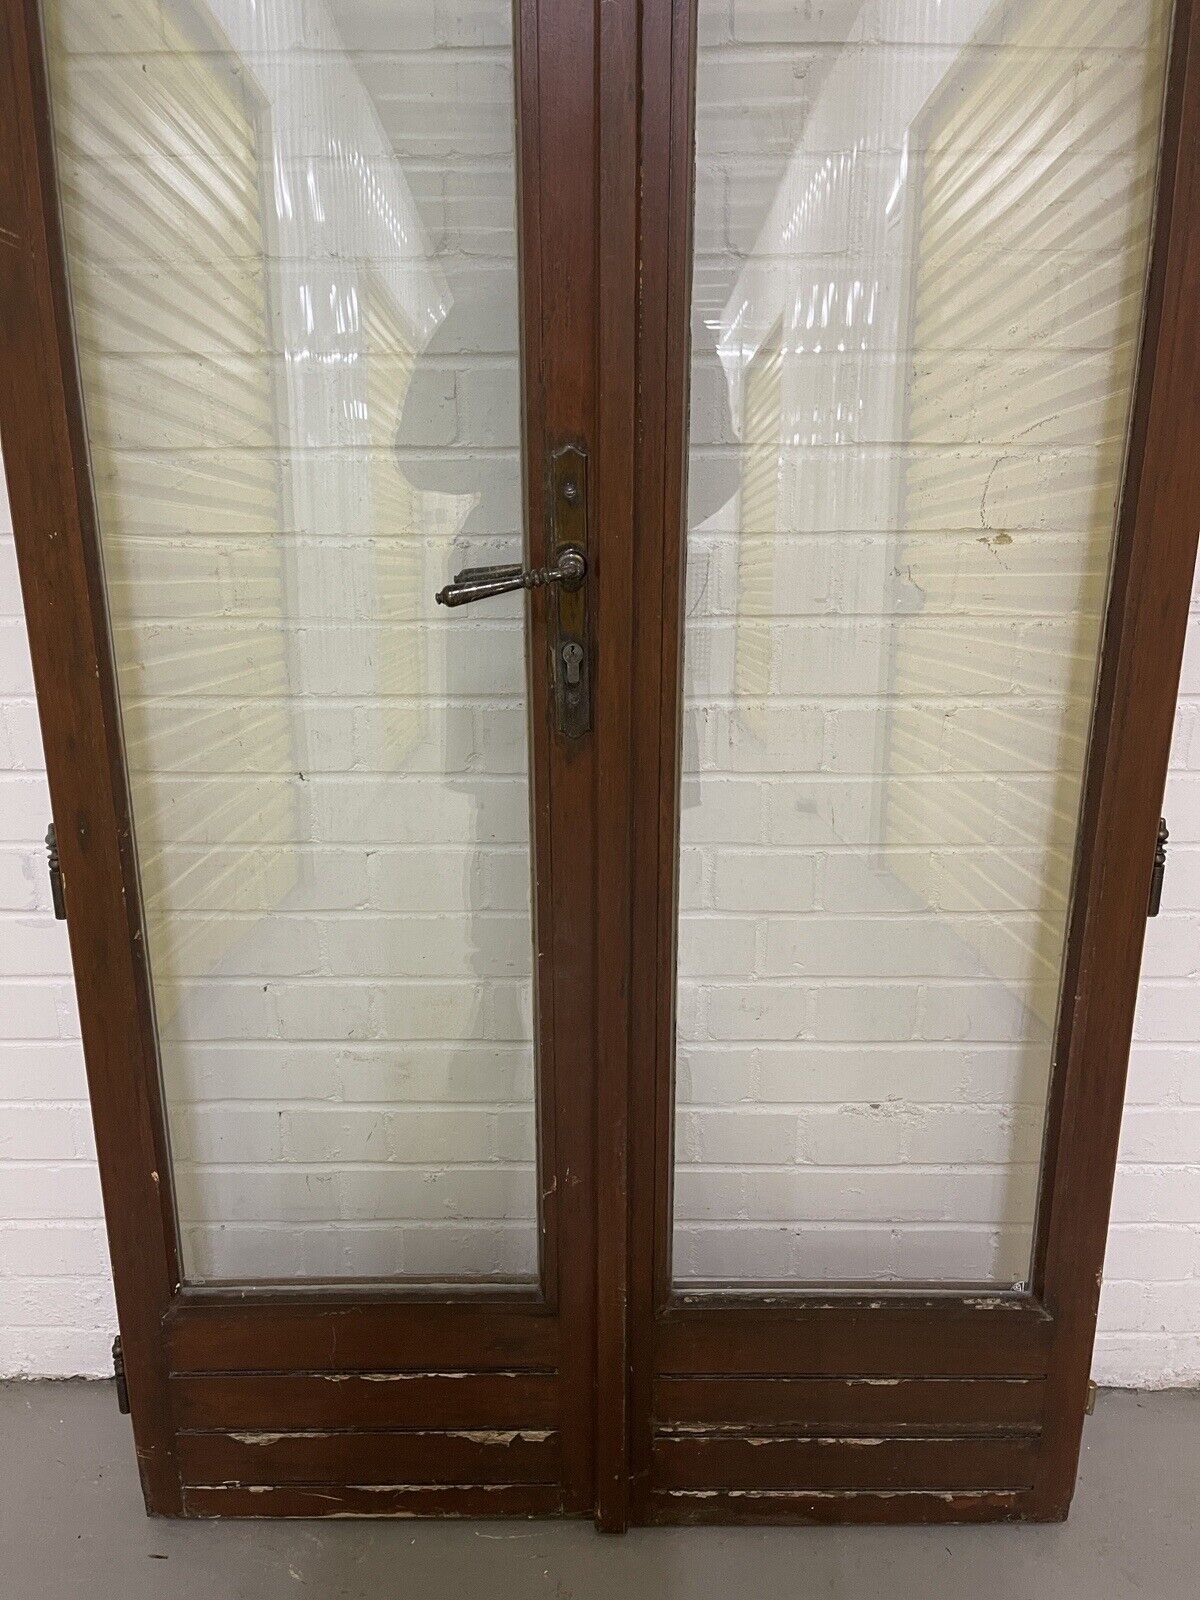 Reclaimed Old French Double Glazed Glass Wooden Double Doors 1923 x 990mm